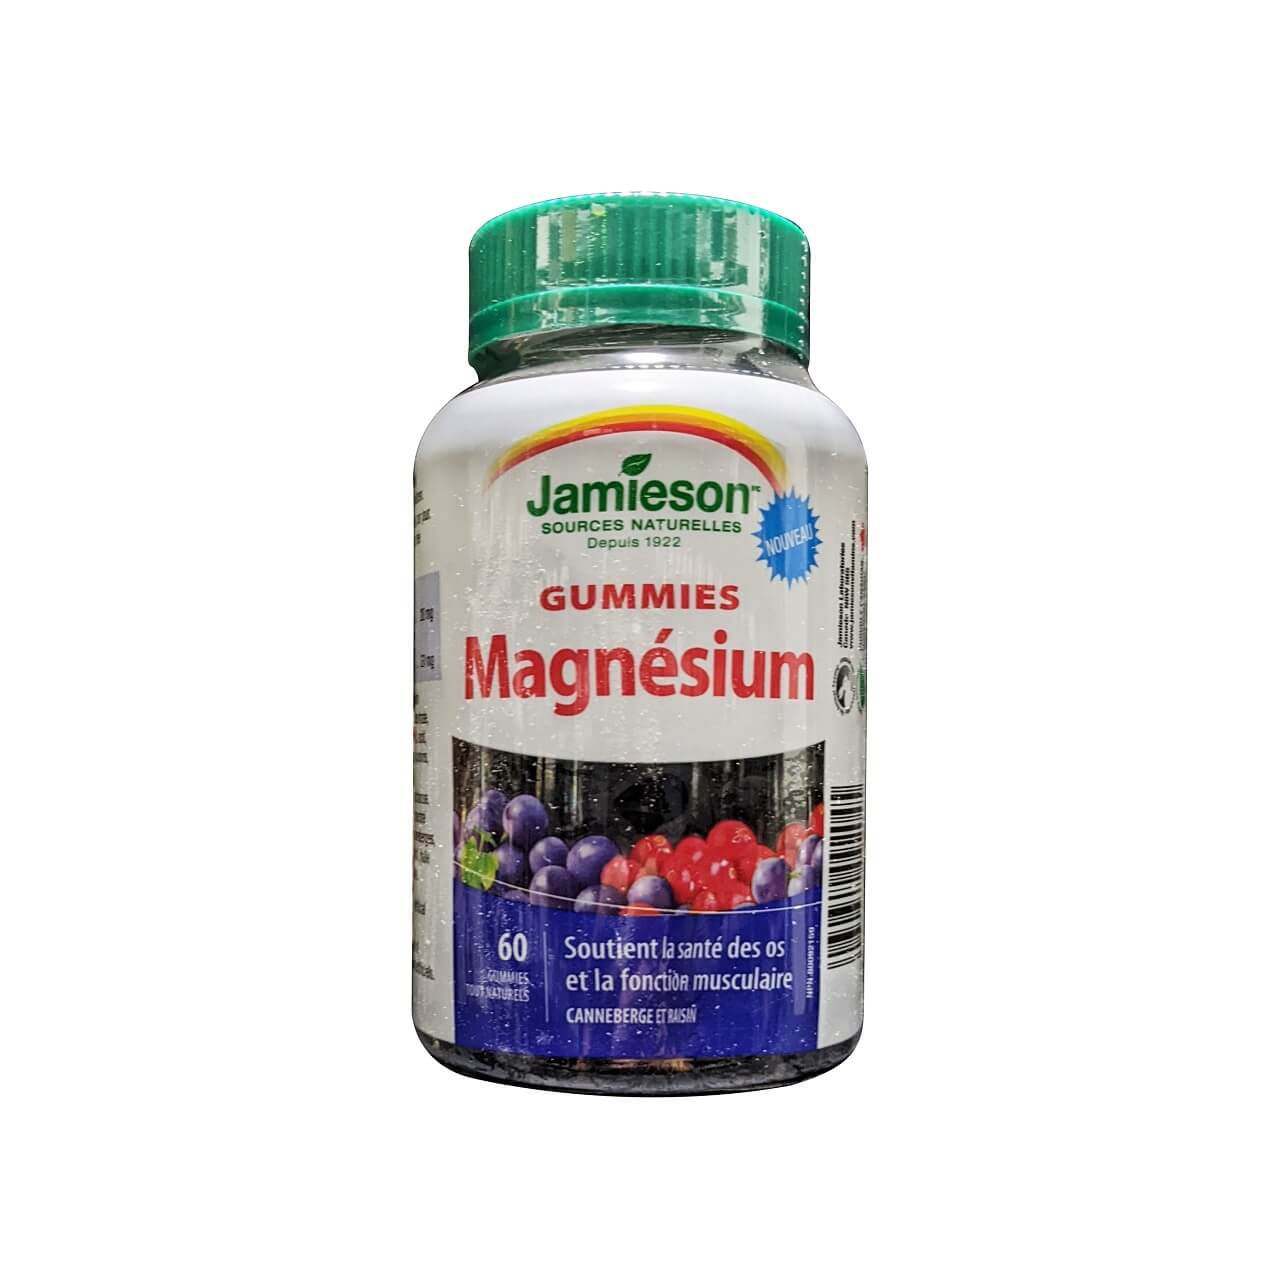 Product label for Jamieson Magnesium Gummies (60 gummies) in French